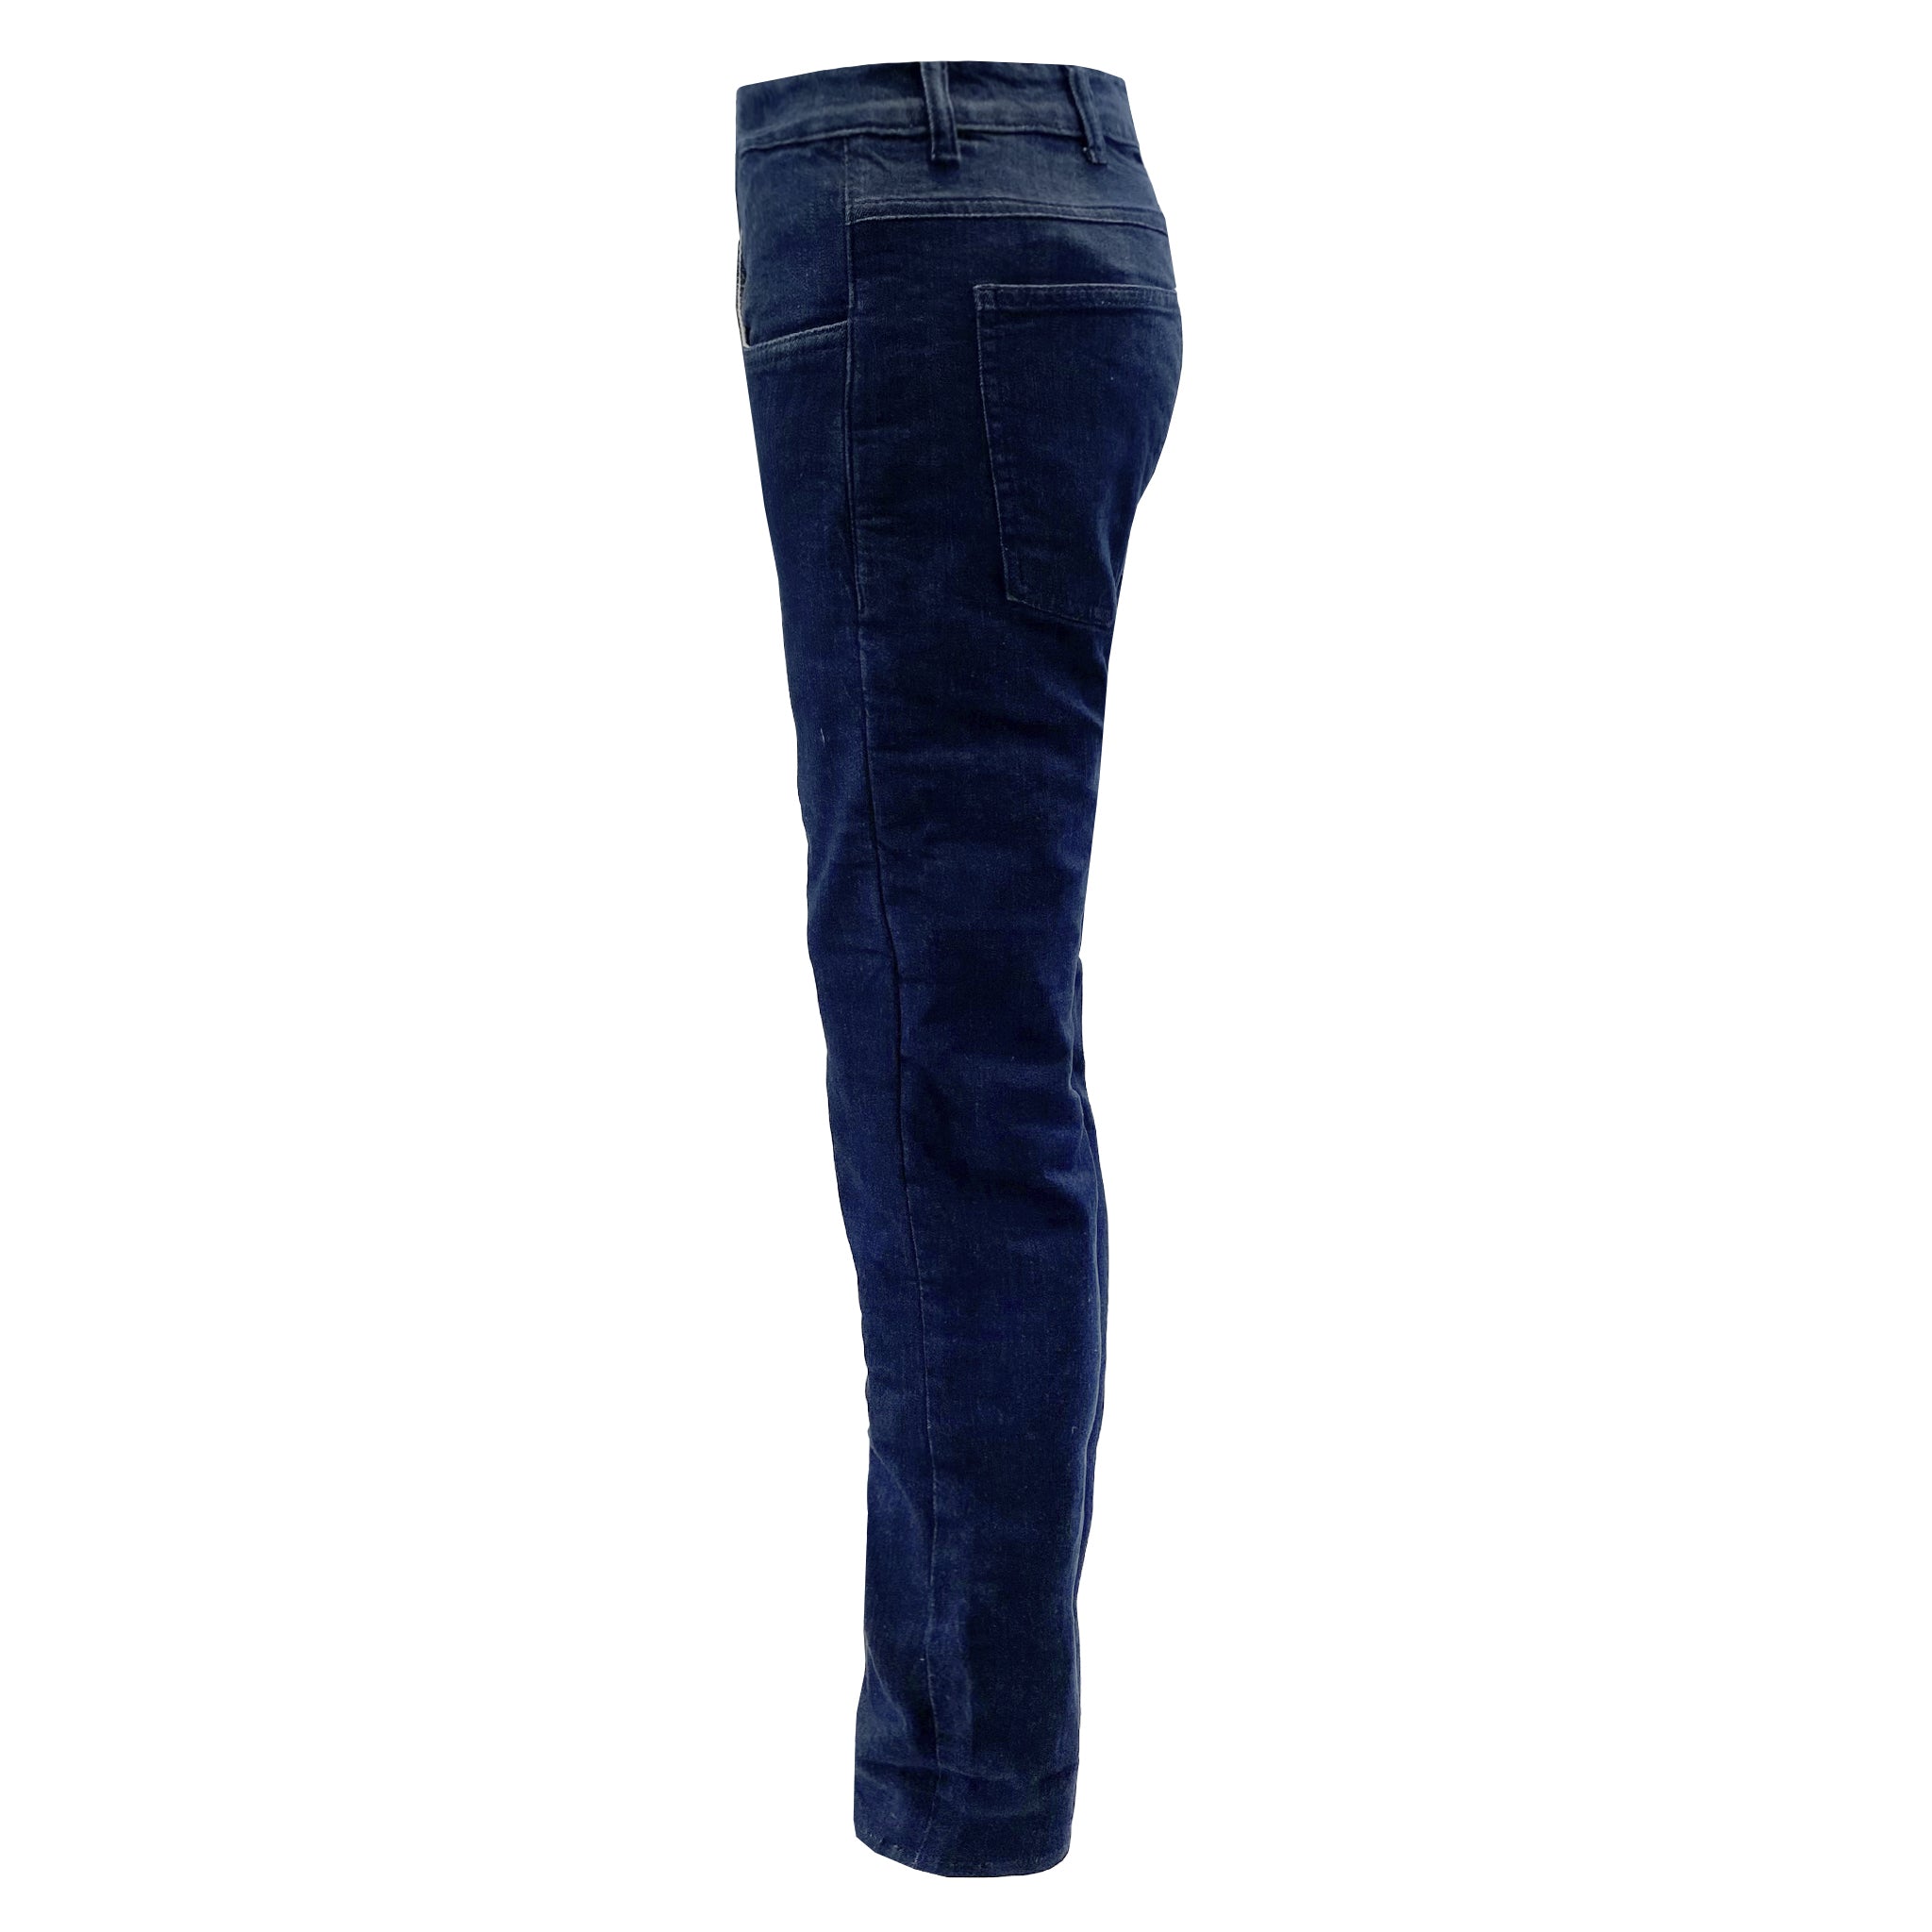 Straight Leg Protective Jeans for Women - Indigo Blue with Pads